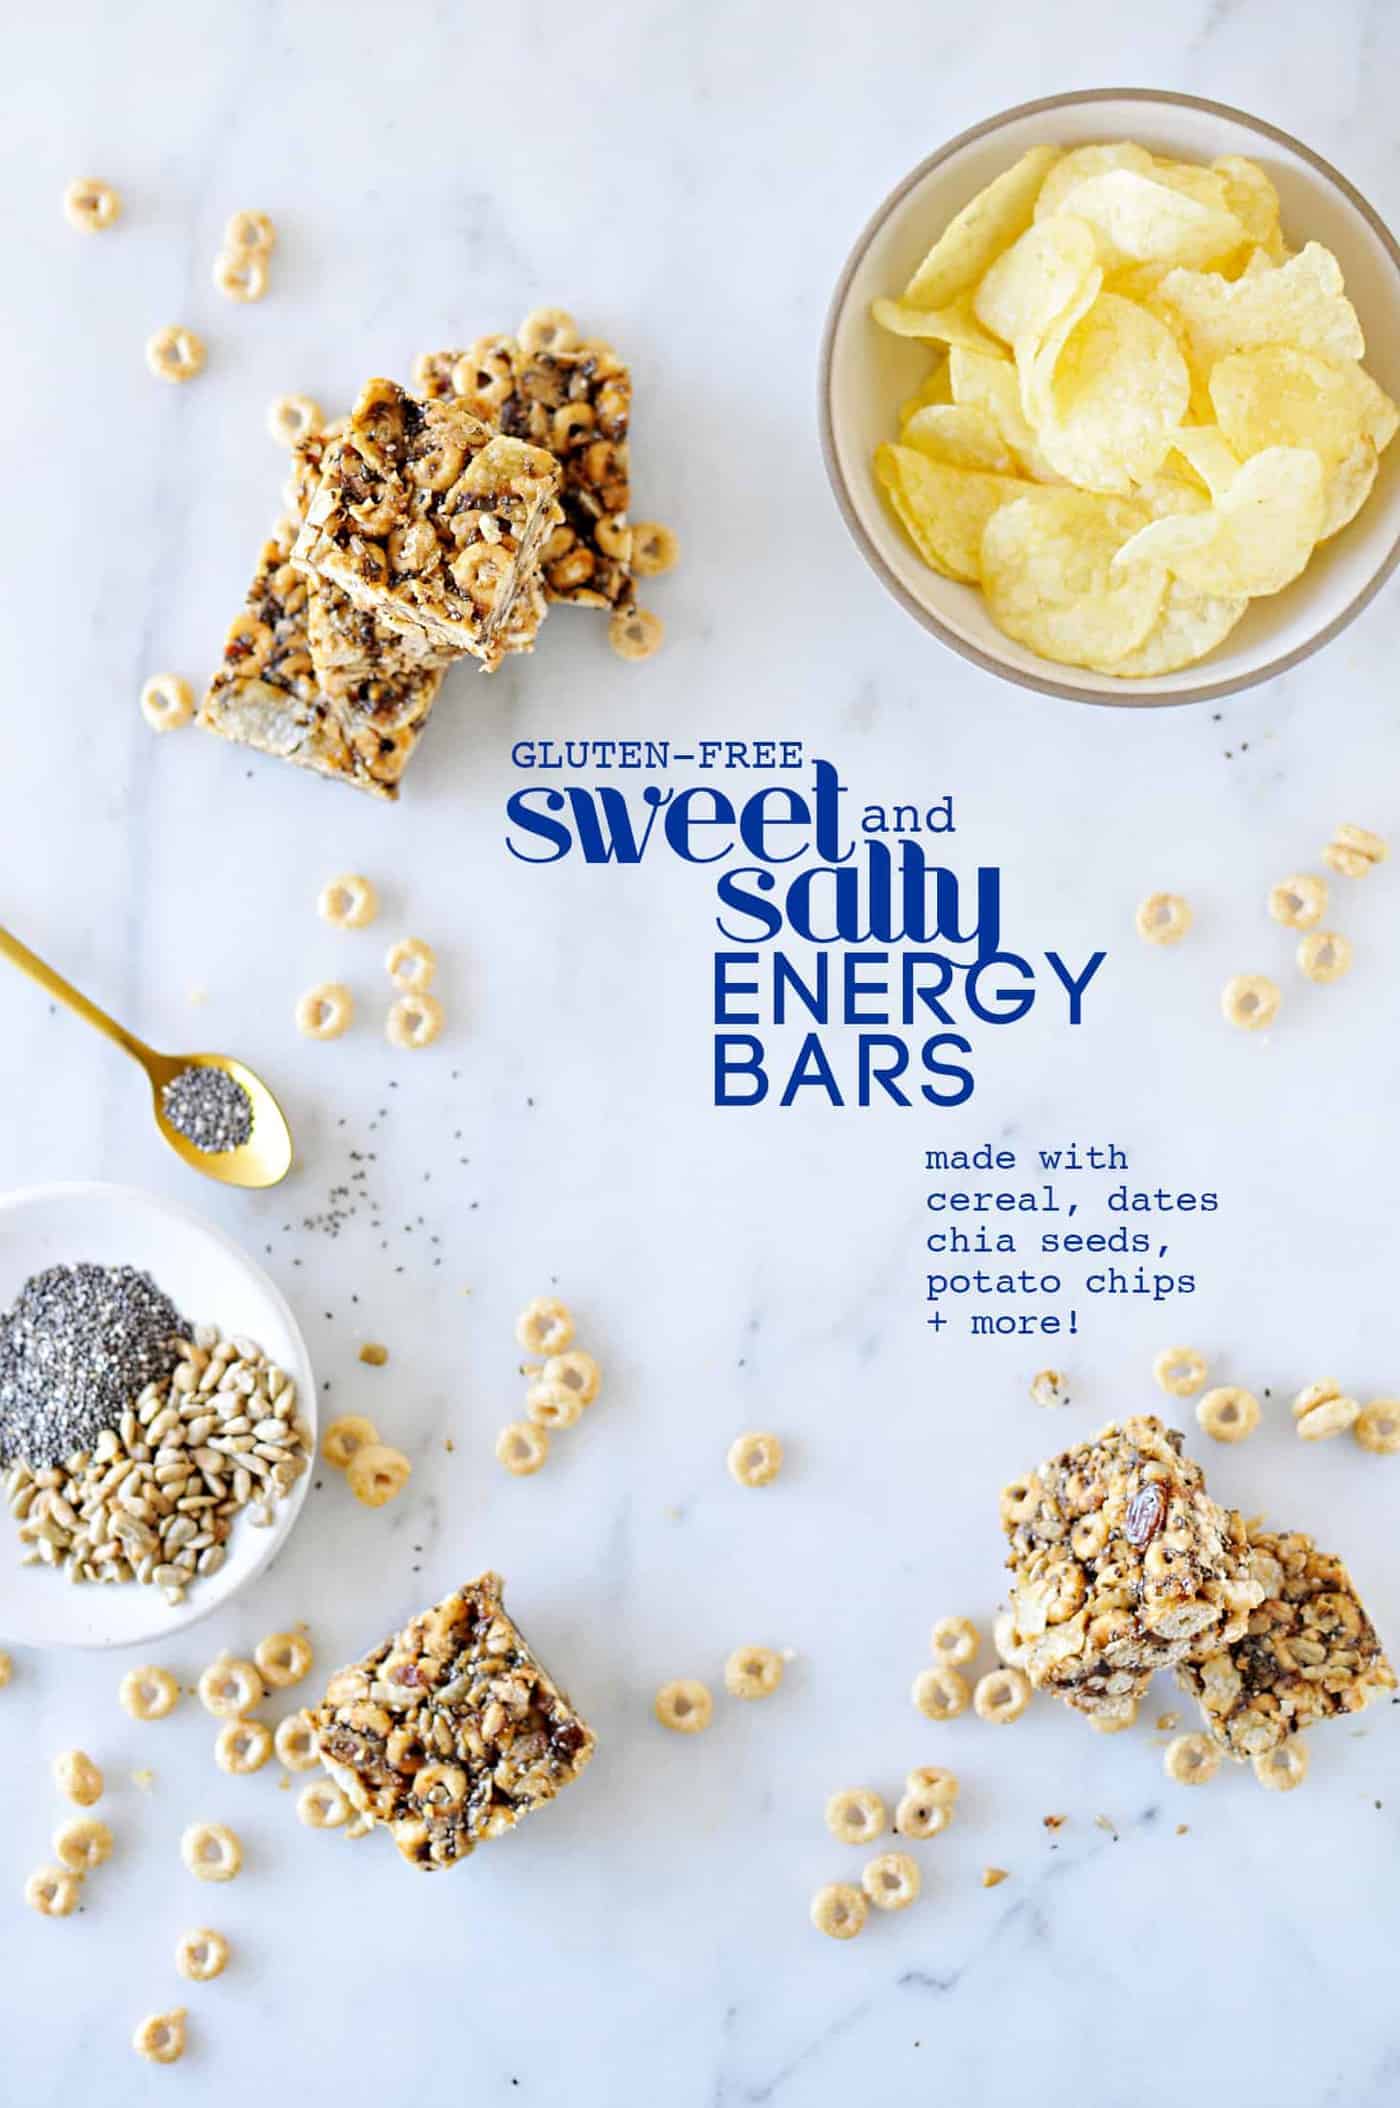 Gluten-Free Sweet and Salty Energy Bars / Our 10 Favorite Make-Ahead Breakfast Recipes (via thepigandquill.com) #mealprep